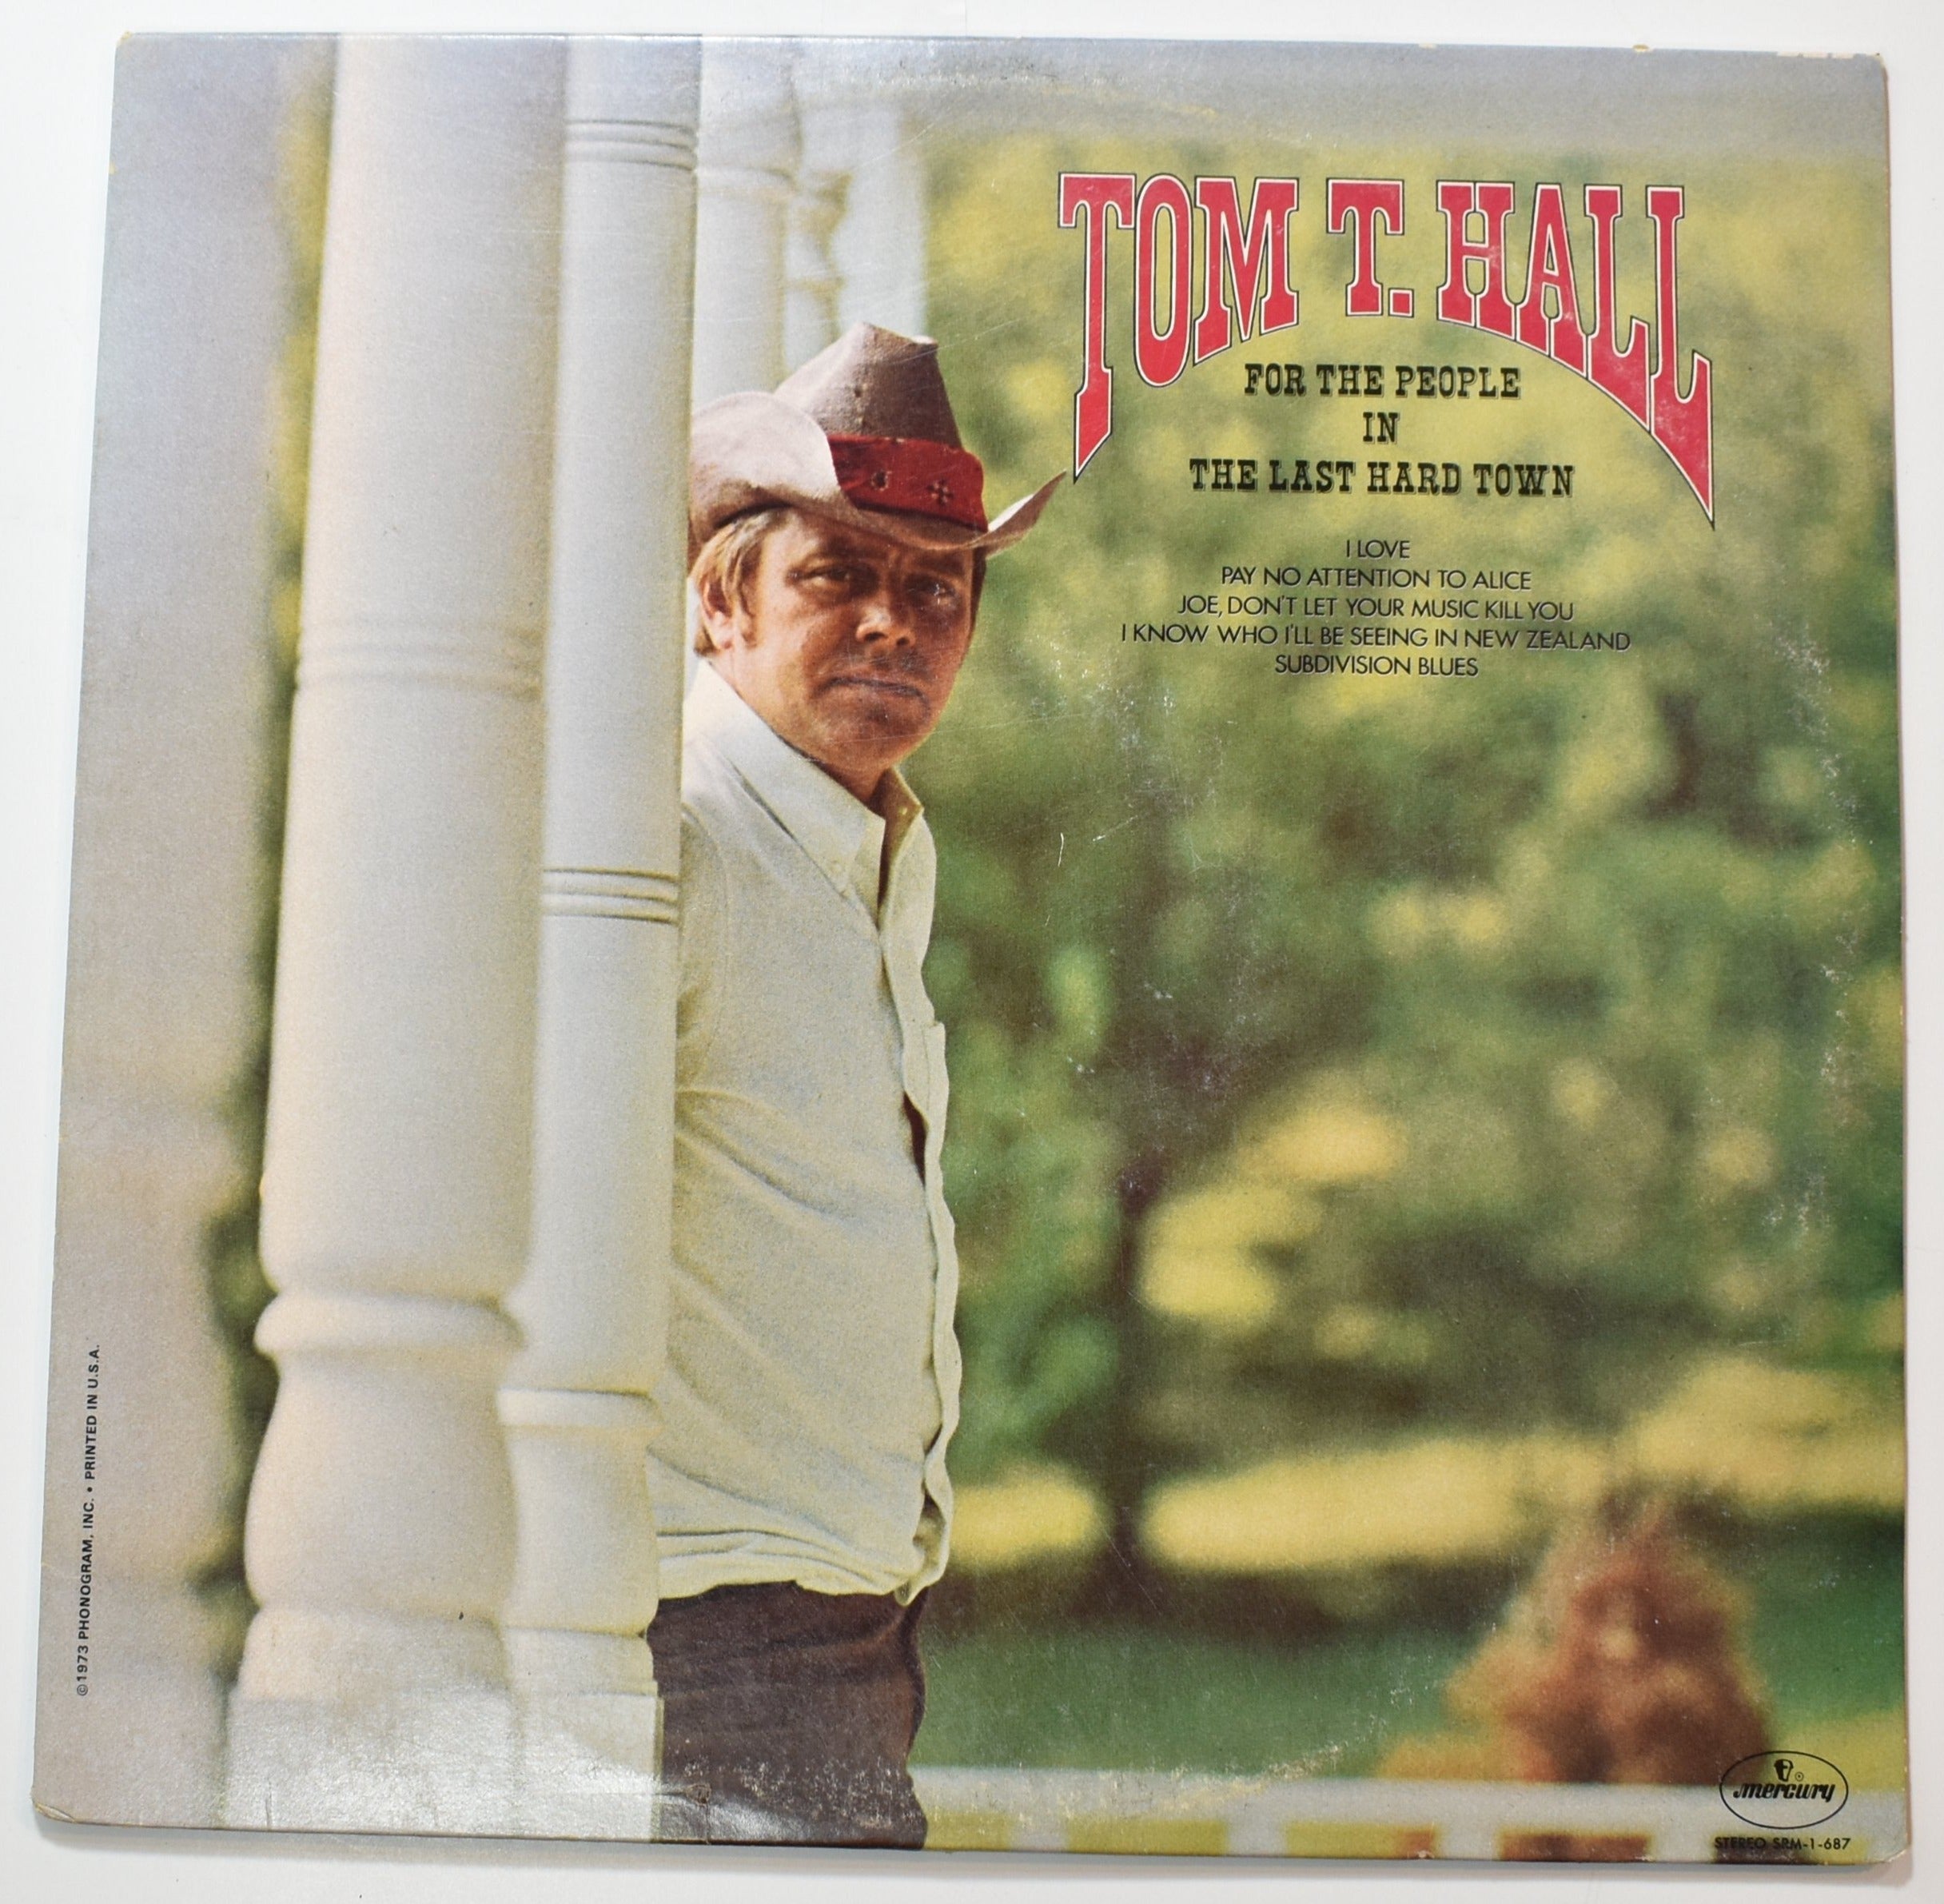 Vinyl Music Record Tom T. Hall For the people in the last Hard town vinyl Music